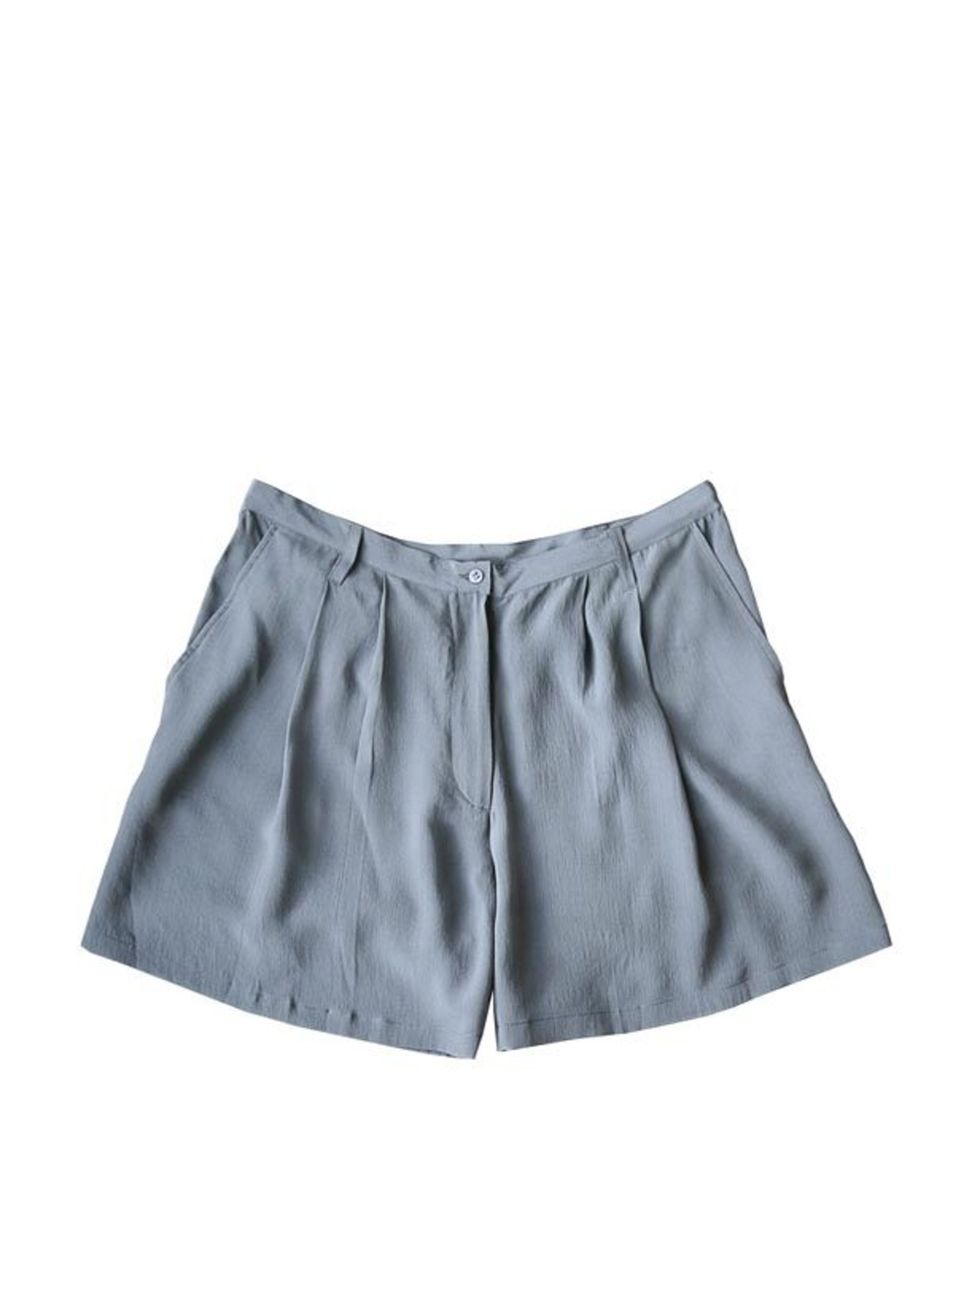 <p>Grey silk shorts, £62, by <a href="http://pyrus-london.com/product/160">Pyrus</a> </p>